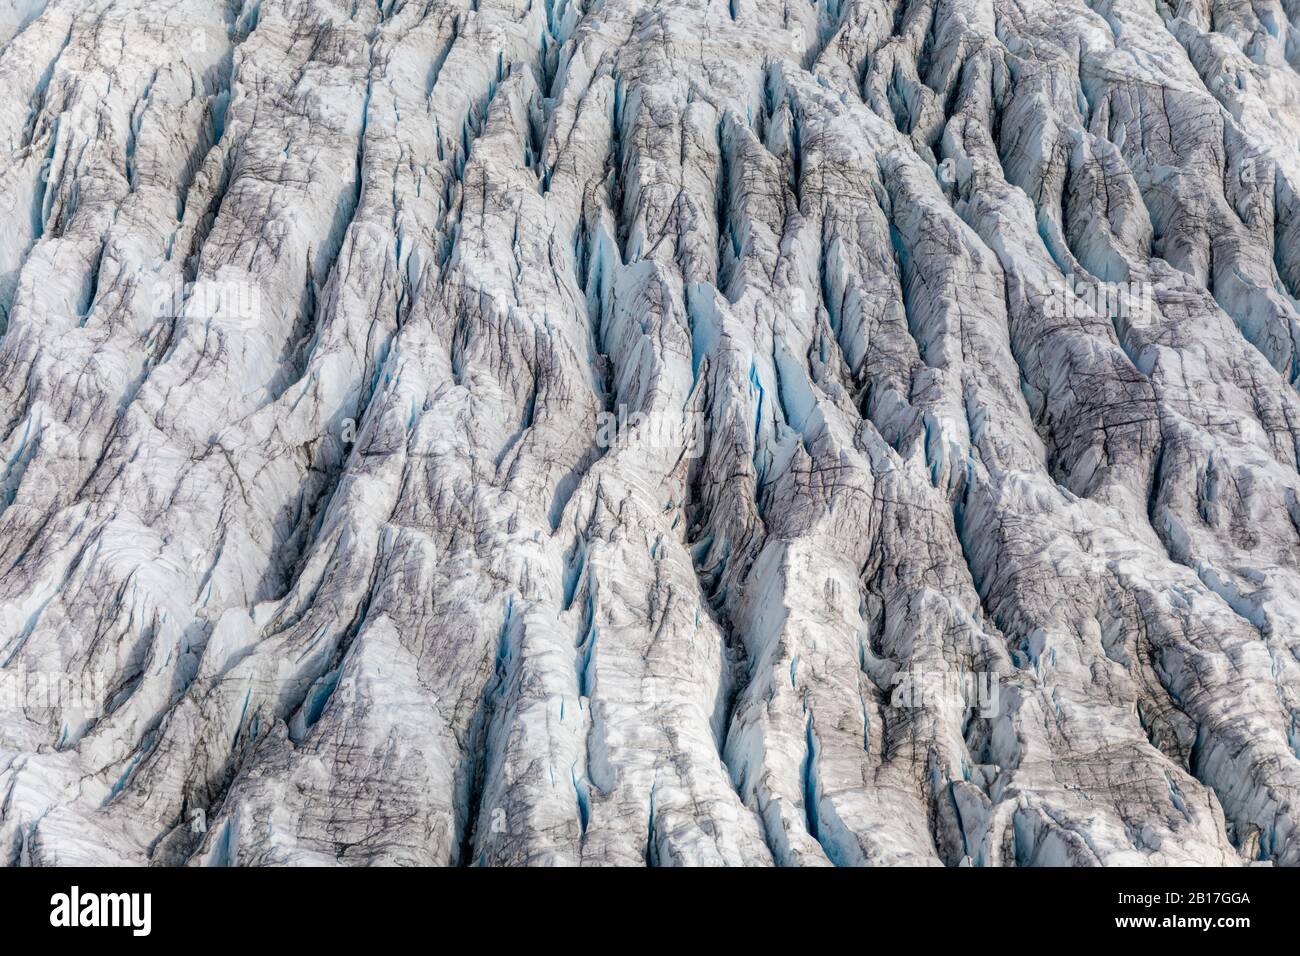 Aerial photography of melting glaciers showing climate change effects Stock Photo